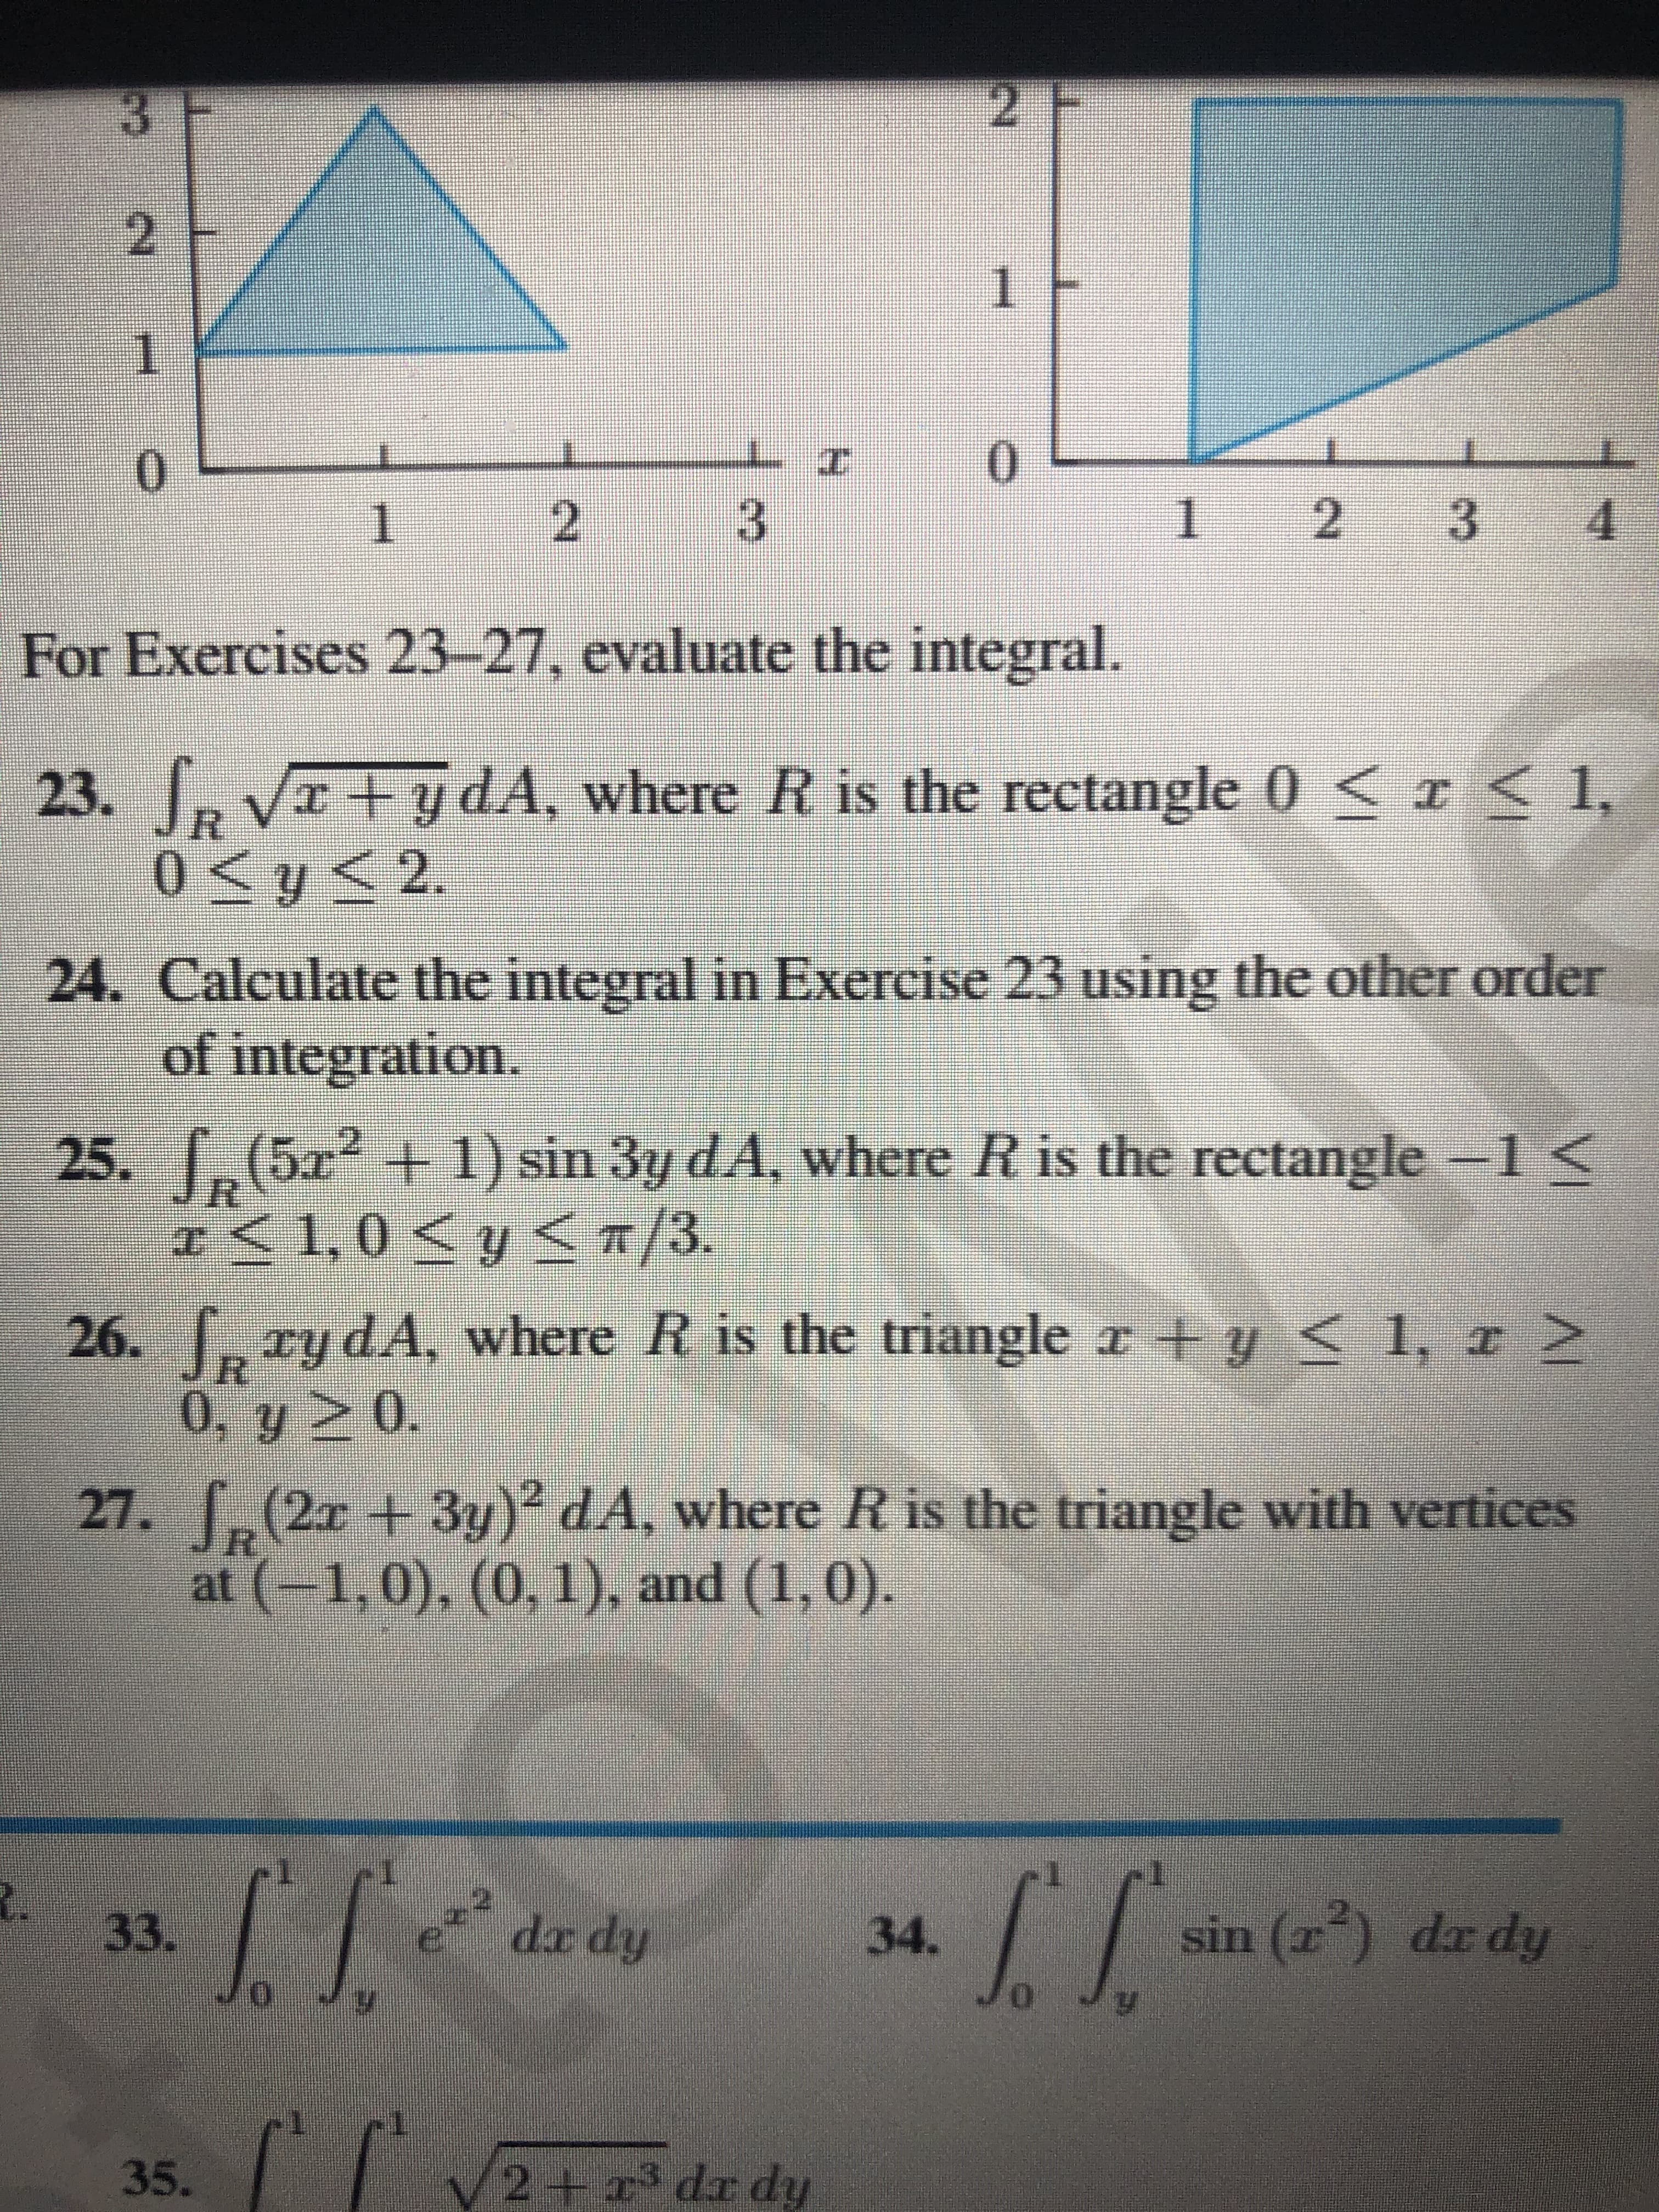 3 F
2 F
2
1
0.
1
2
4.
For Exercises 23-27, evaluate the integral.
23.
, VI+ydA, where R is the rectangle 0 < <1,
0<y< 2.
24. Calculate the integral in Exercise 23 using the other order
of integration.
25. [ -1<
(5x²+1) sin 3y dA, where R is the rectangle
1,0Sy
31.0<y</3.
cy dA, where R is the triangle r +y
0, y 2 0.
(2x + 3y)? dA, where R is the triangle with vertices
at (-1,0), (0, 1), and (1,0).
27.
33.
dx dy
34.
sin (r) dr dy
35.
2+x3 dx dy
VI
